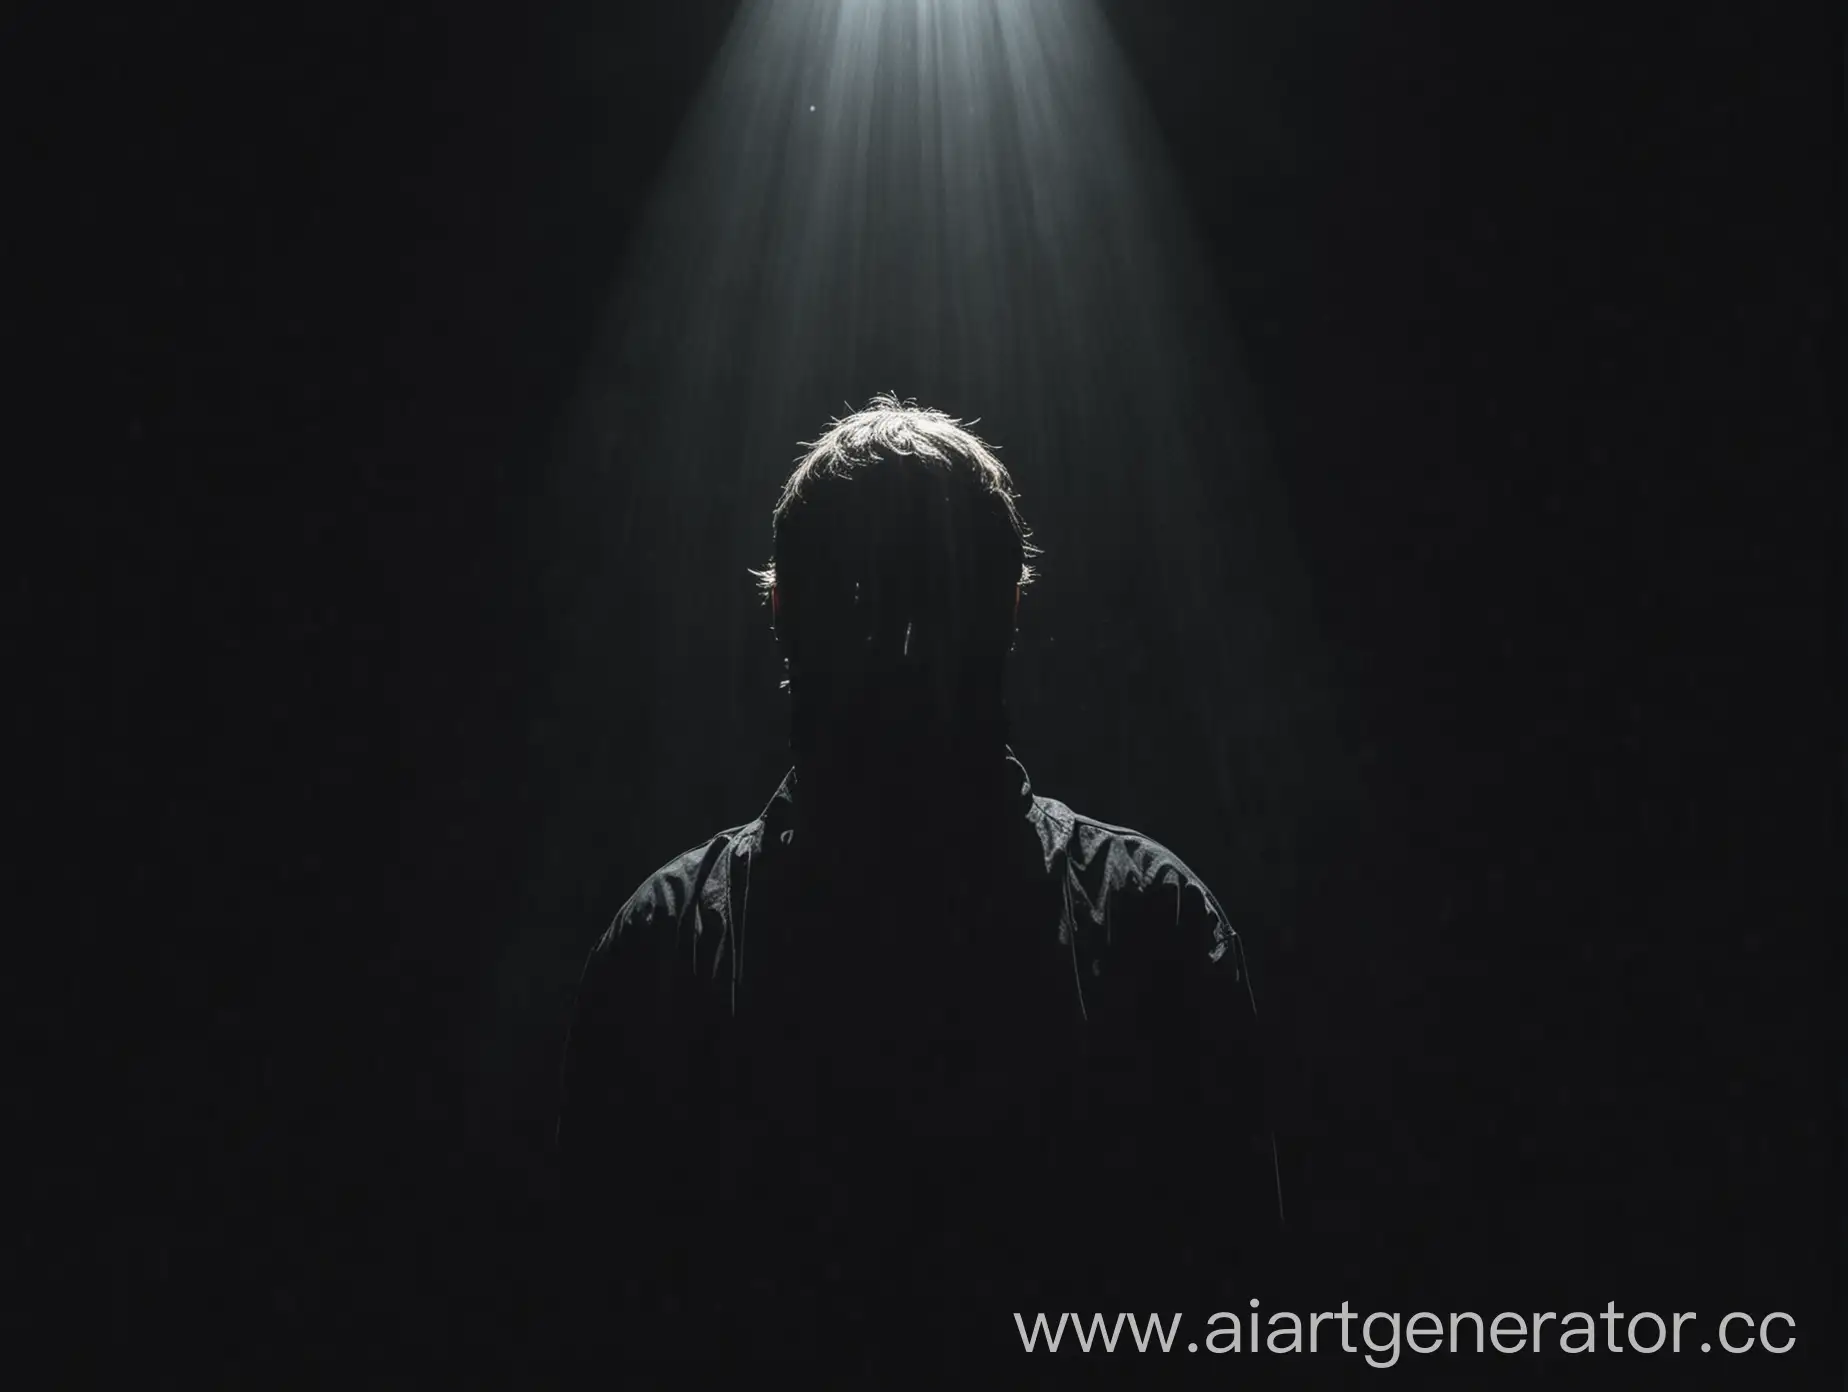 Mysterious-Figure-in-Dark-Room-Illuminated-by-Light-Source